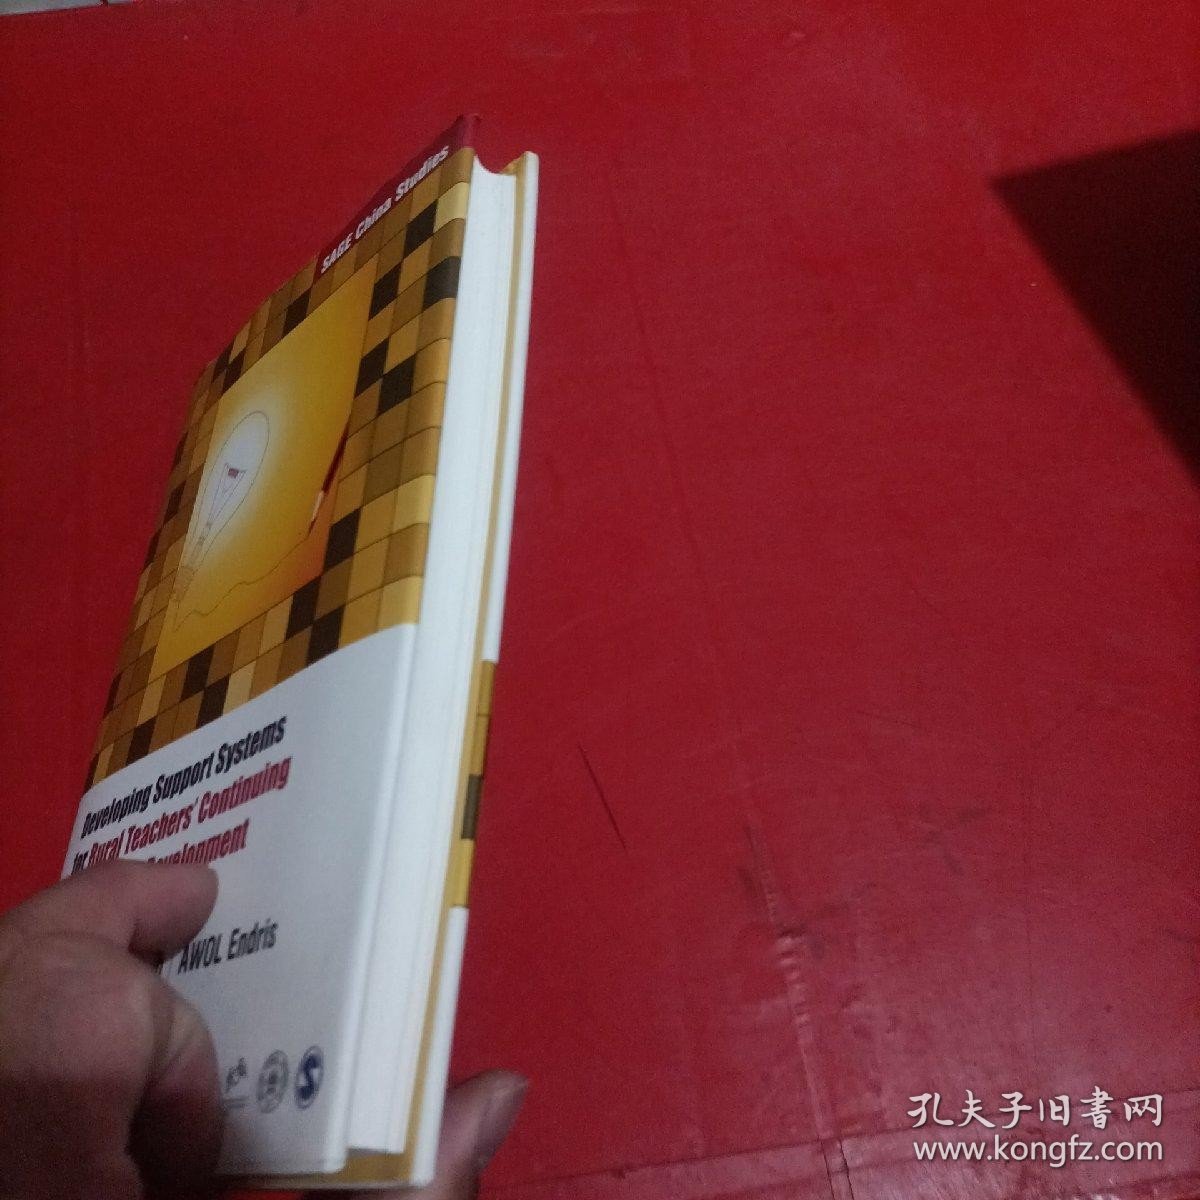 develog ping support systems for rural teachers continuing professional devel 建立农村教师持续专业发展的支撑体系